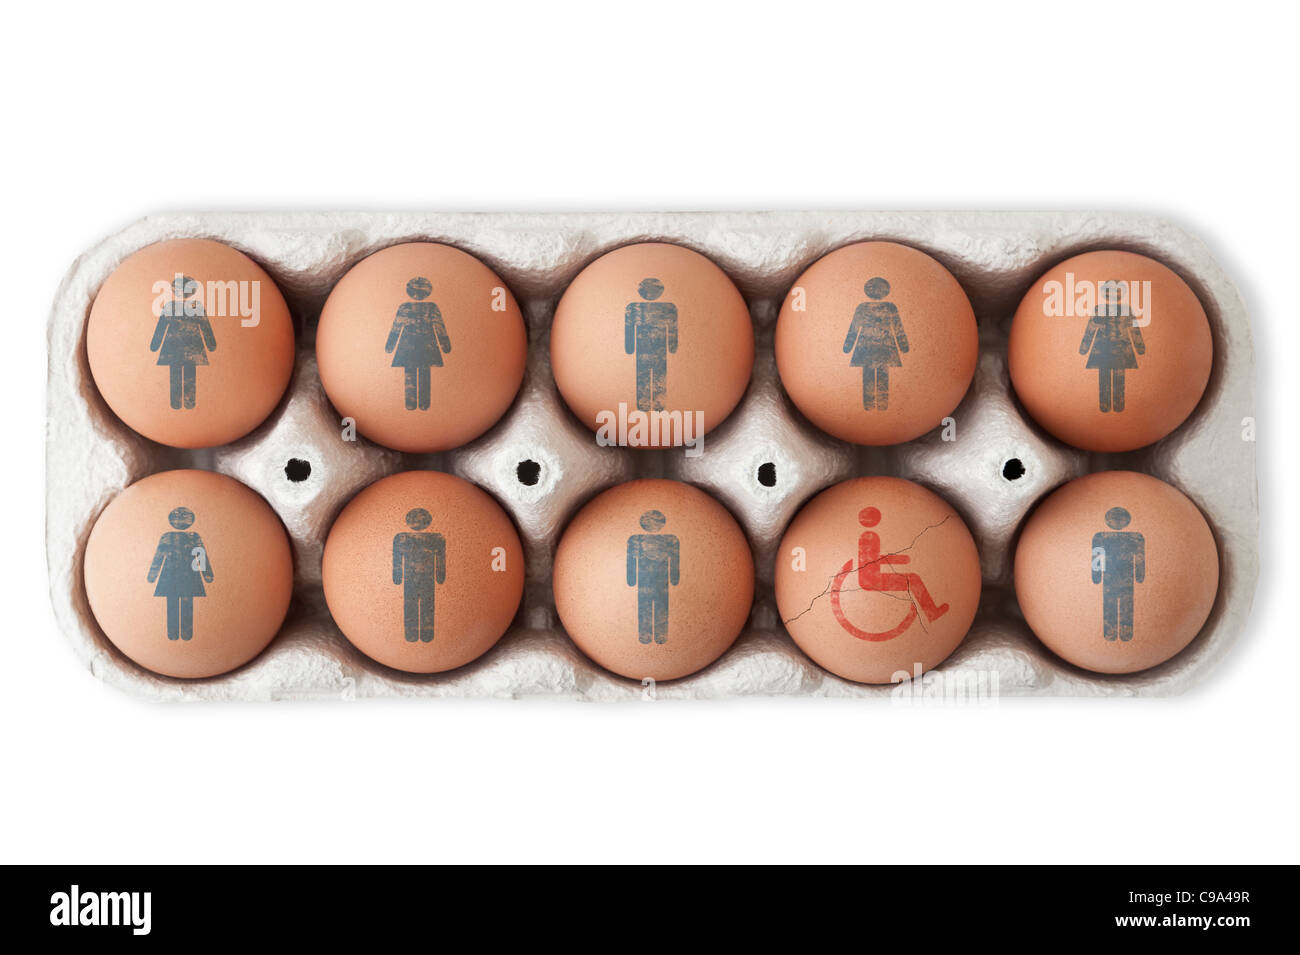 Box of eggs. Male and female symbols on nine of them and one cracked egg with a disabled symbol on it.  White background, Cutout Stock Photo